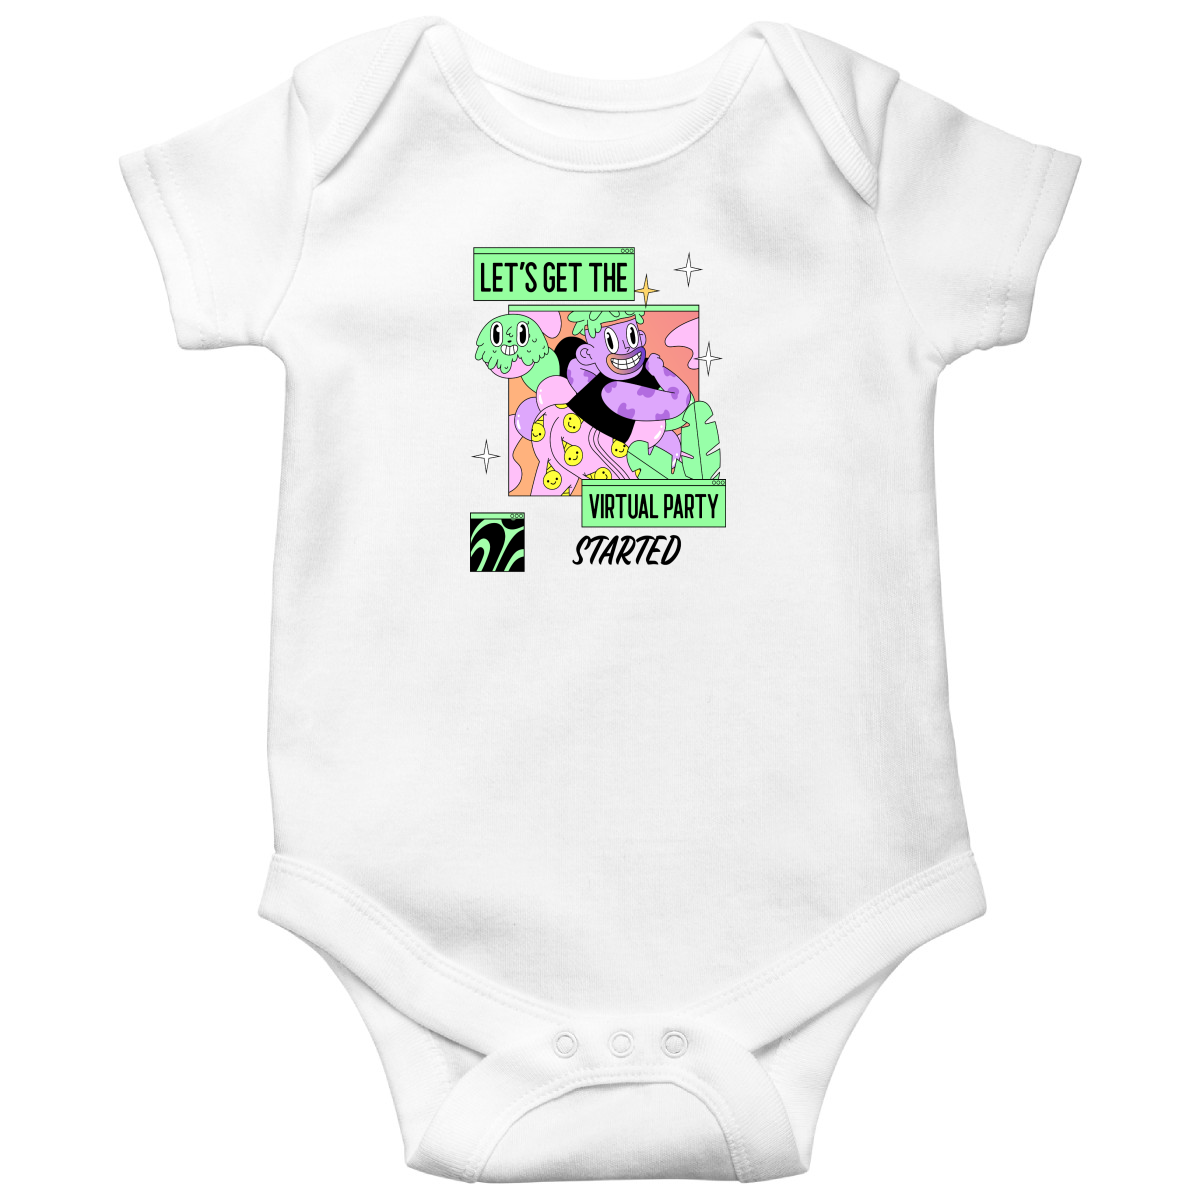 Let's get the virtual party started Baby Bodysuits | White